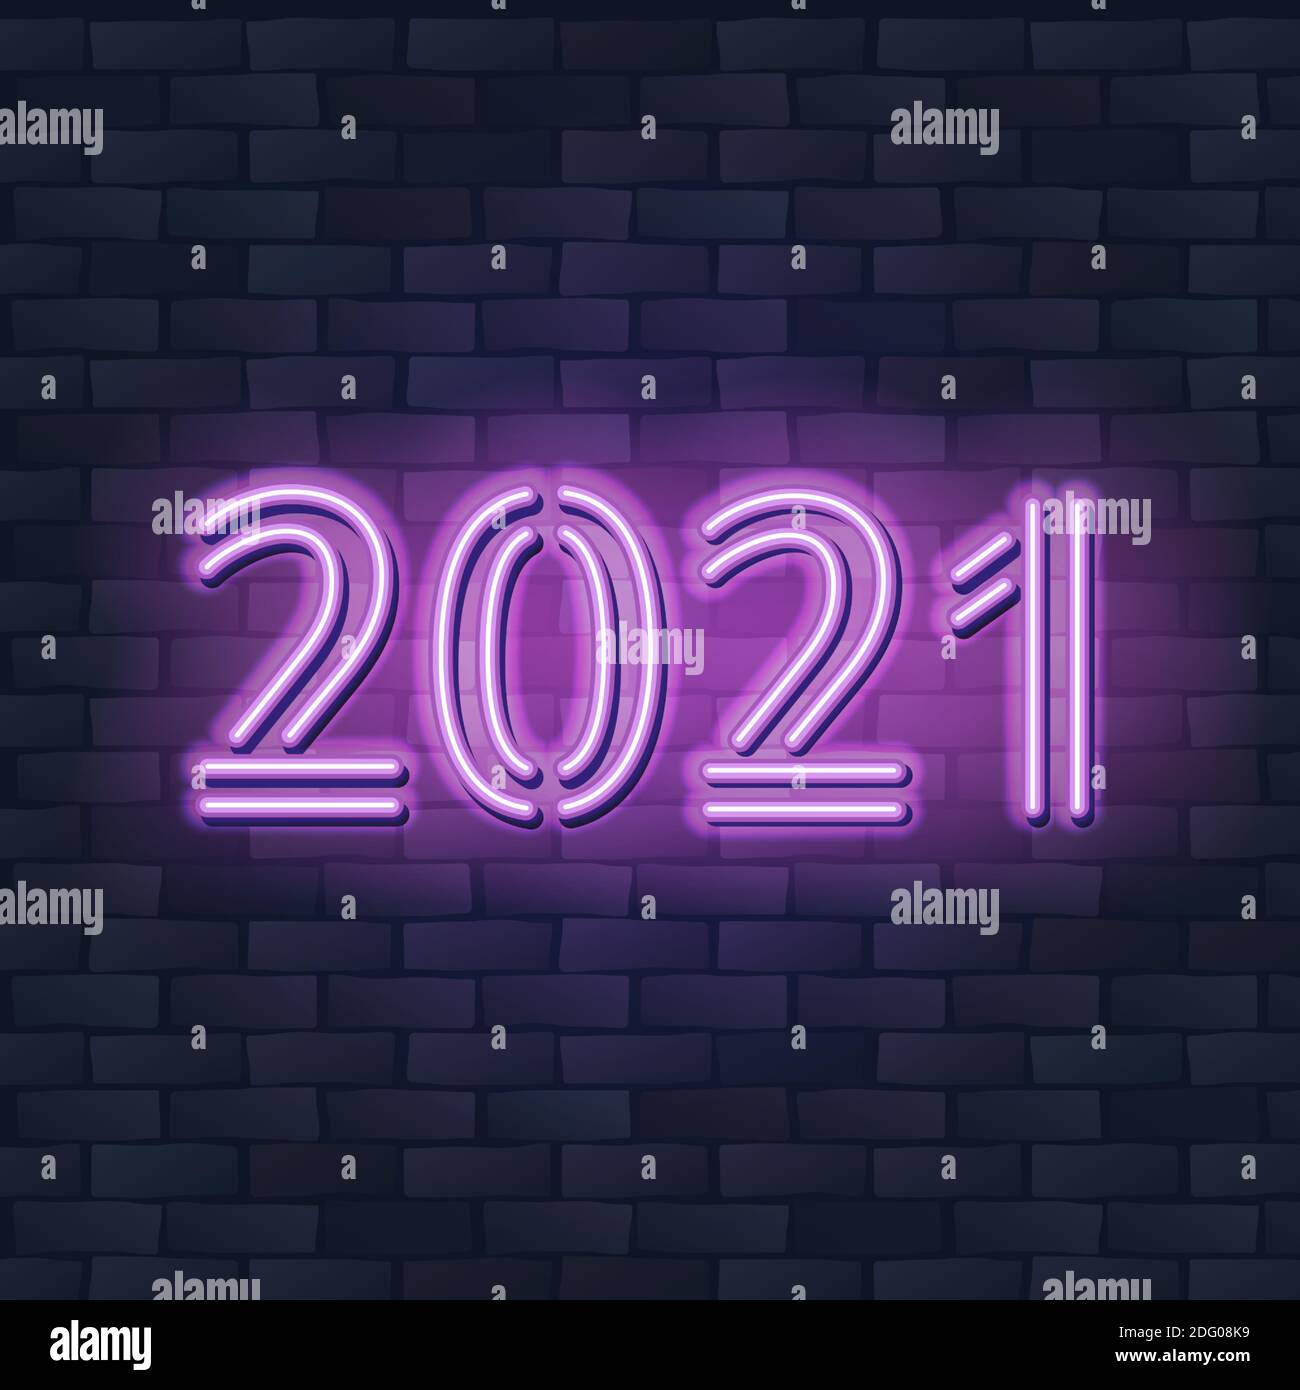 2021 New Year Concept with Colorful Neon Lights. Retro Design Elements for Presentations, Flyers, Leaflets, Posters or Postcards. Vector Illustration. Stock Vector